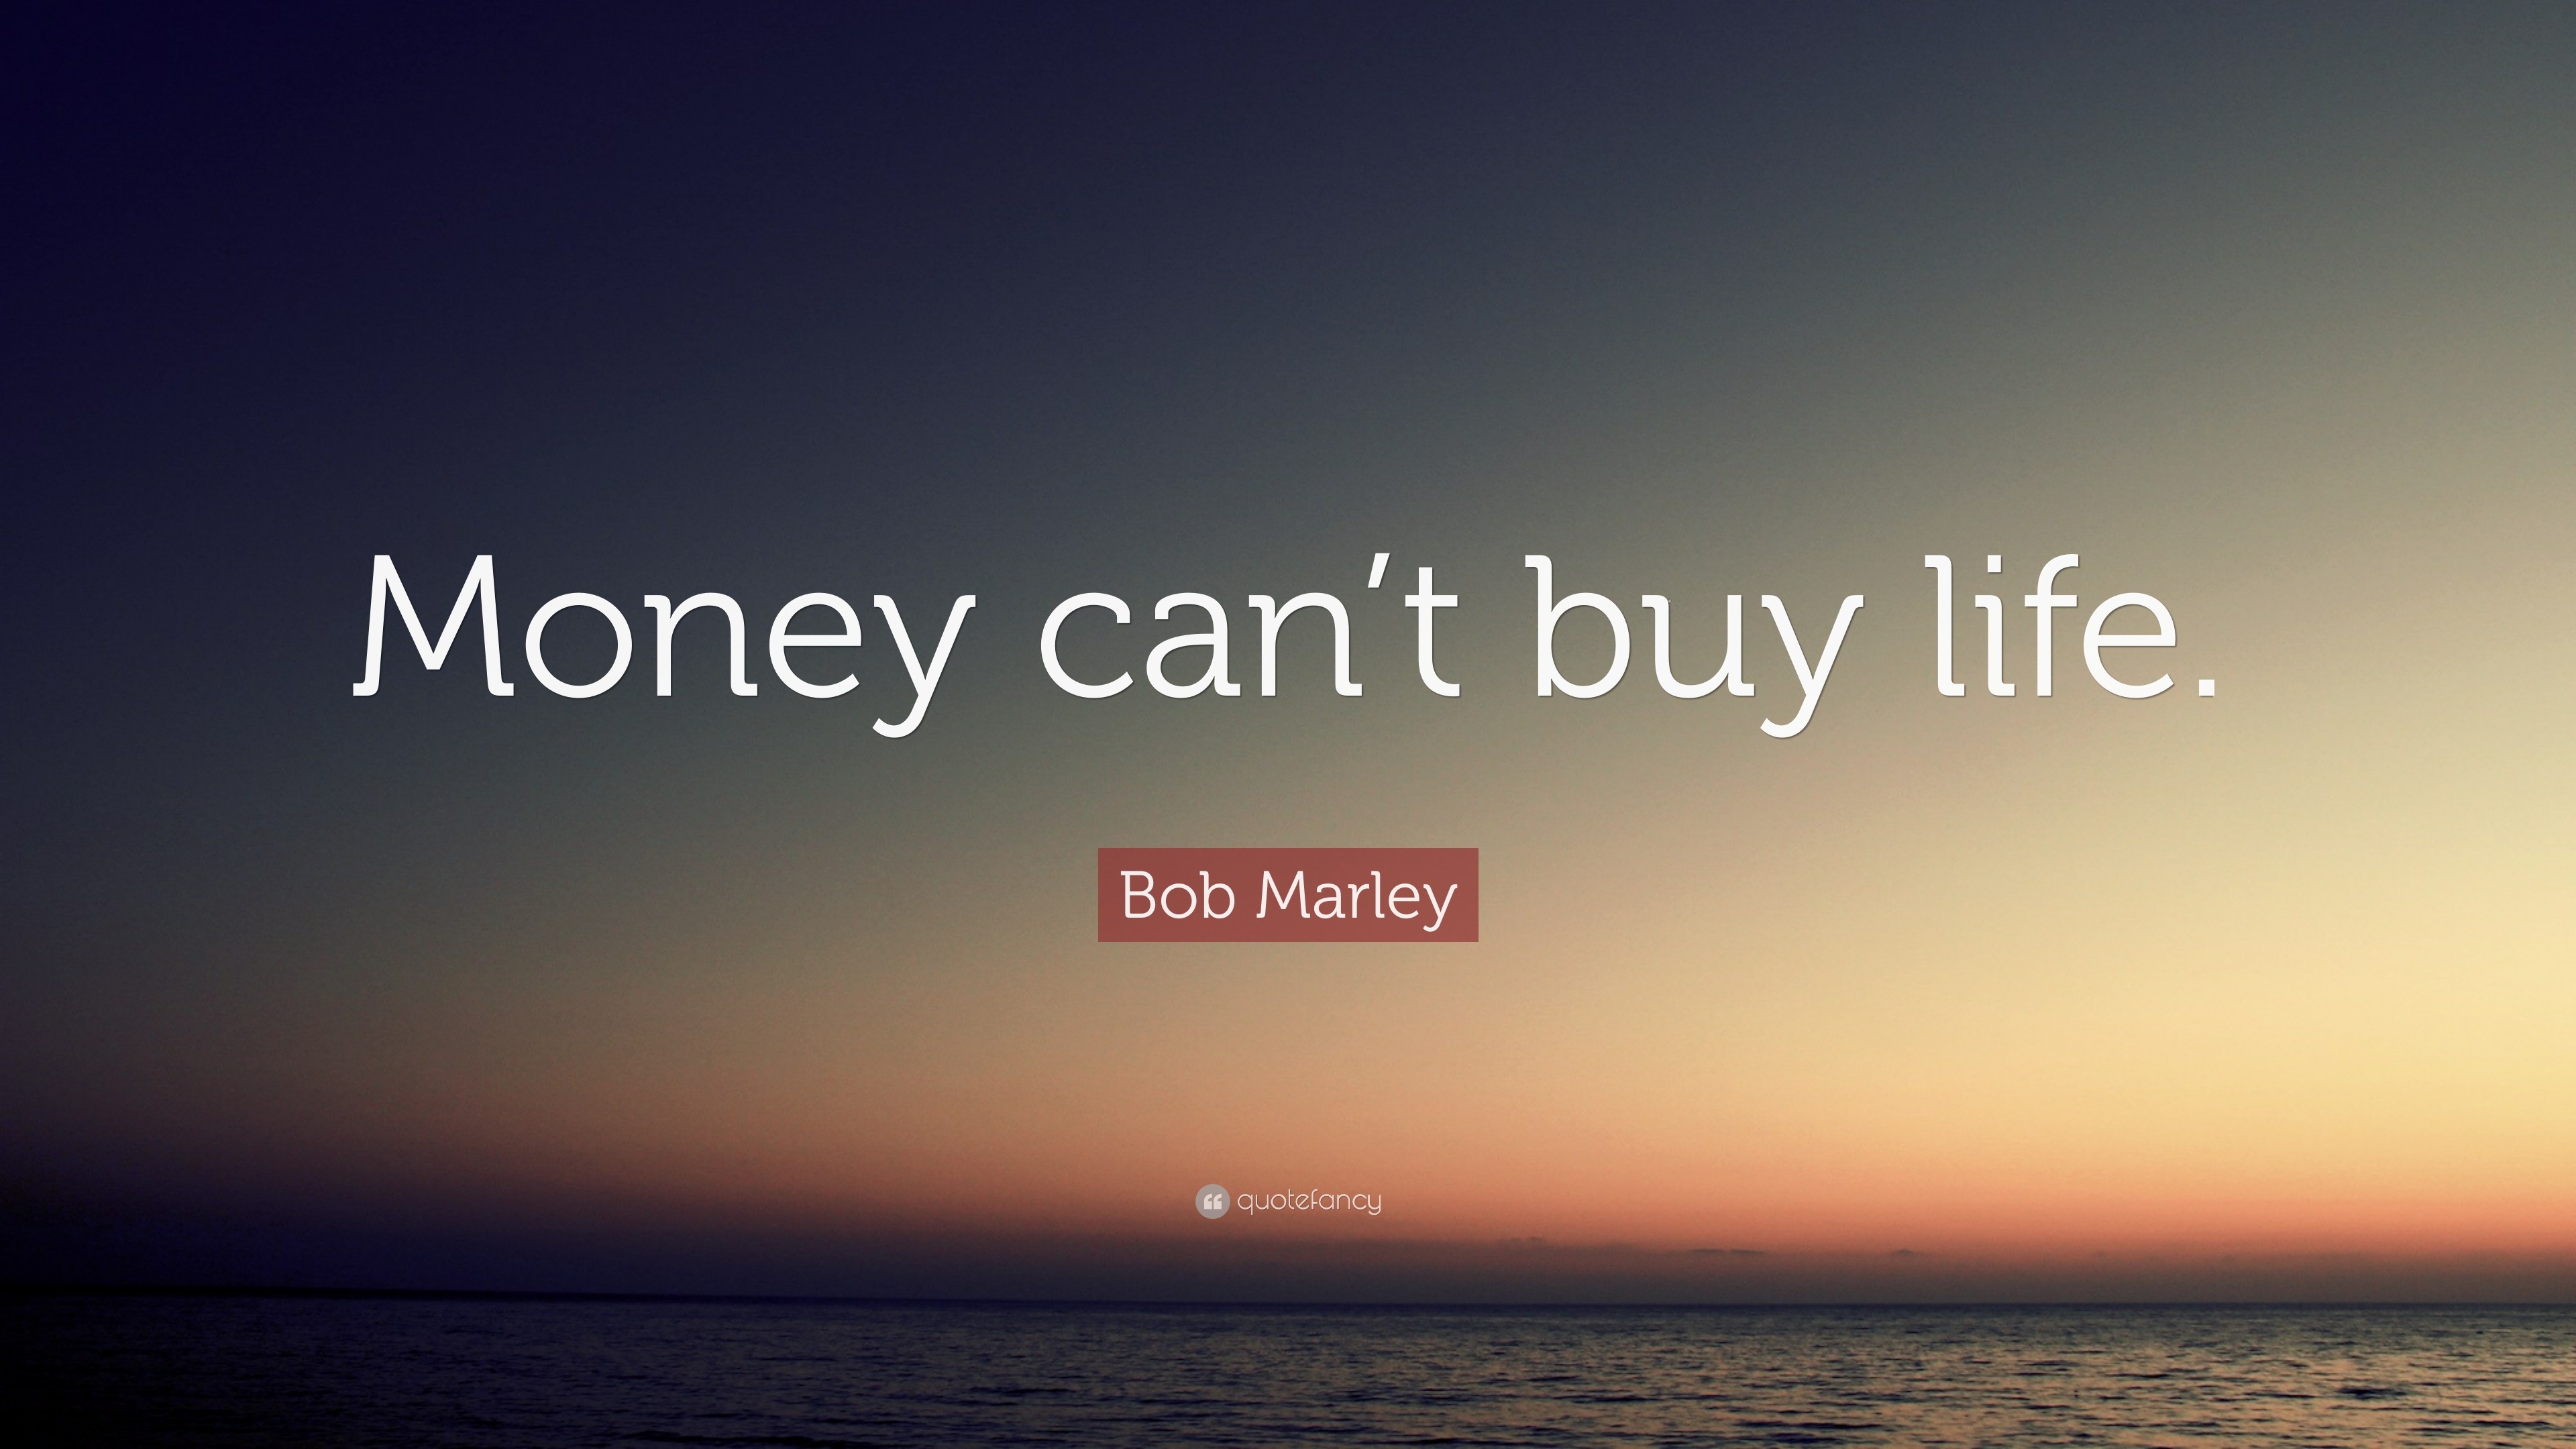 Bob Marley Quotes (100 wallpapers) - Quotefancy